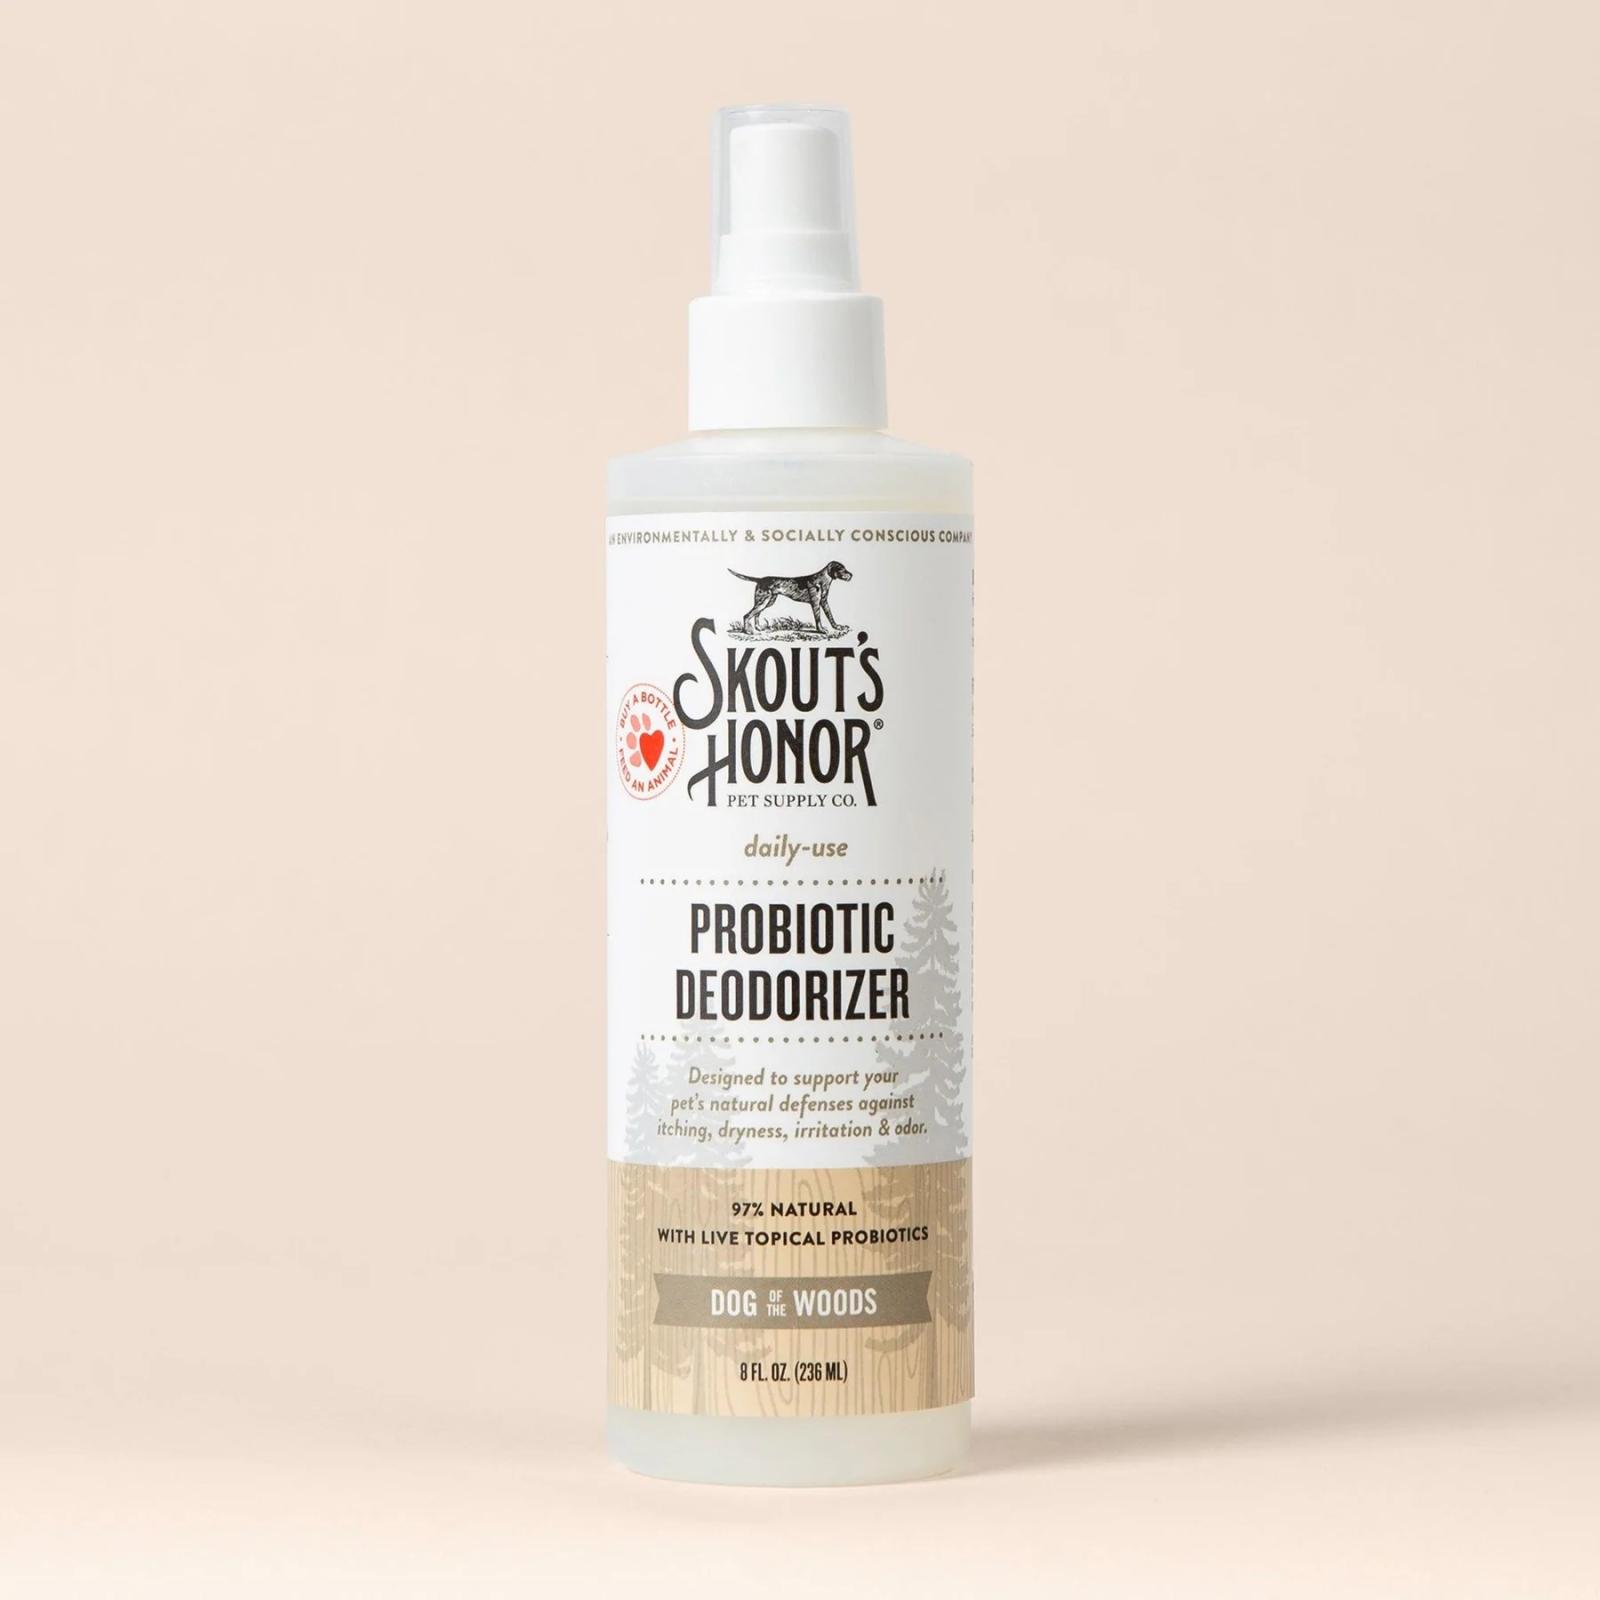 Skout's Honor Probiotic Deodorizer For Dogs & Cats Dog of the Woods